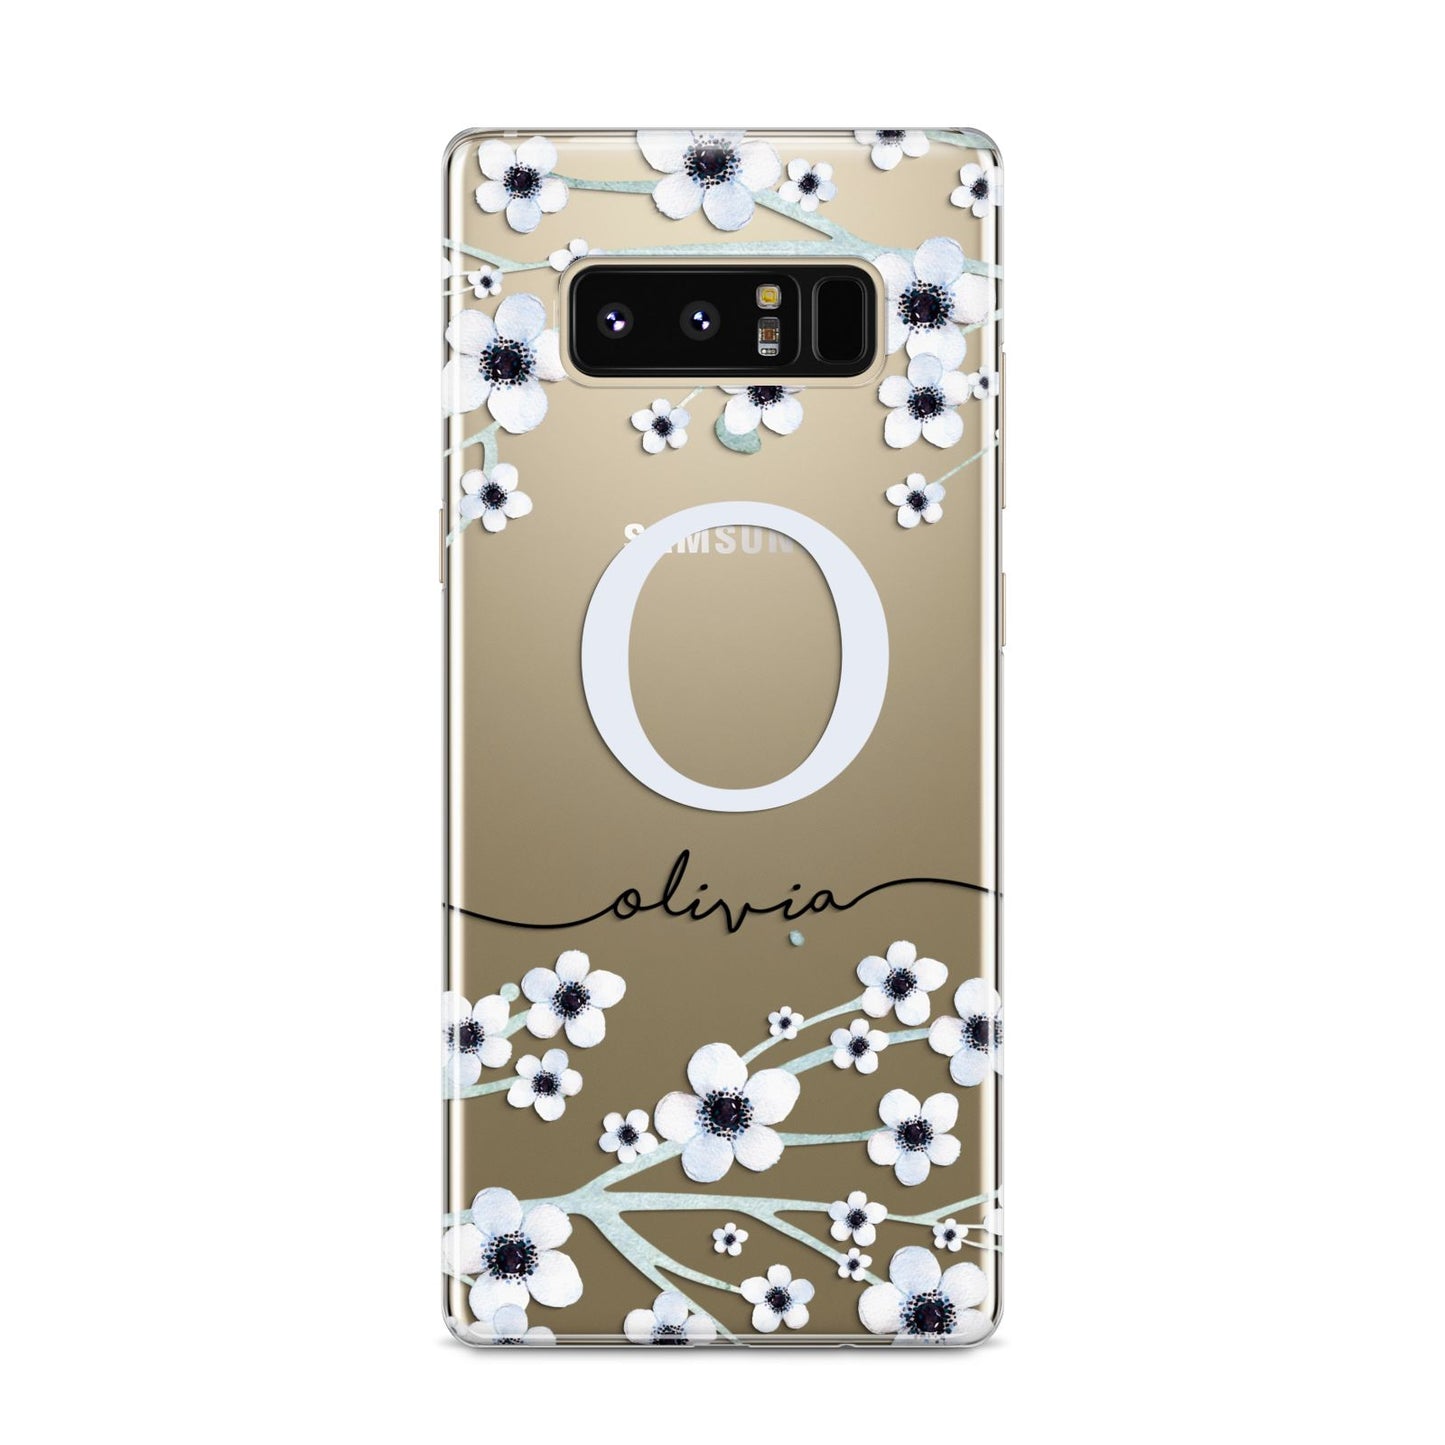 Personalised White Flower Samsung Galaxy S8 Case